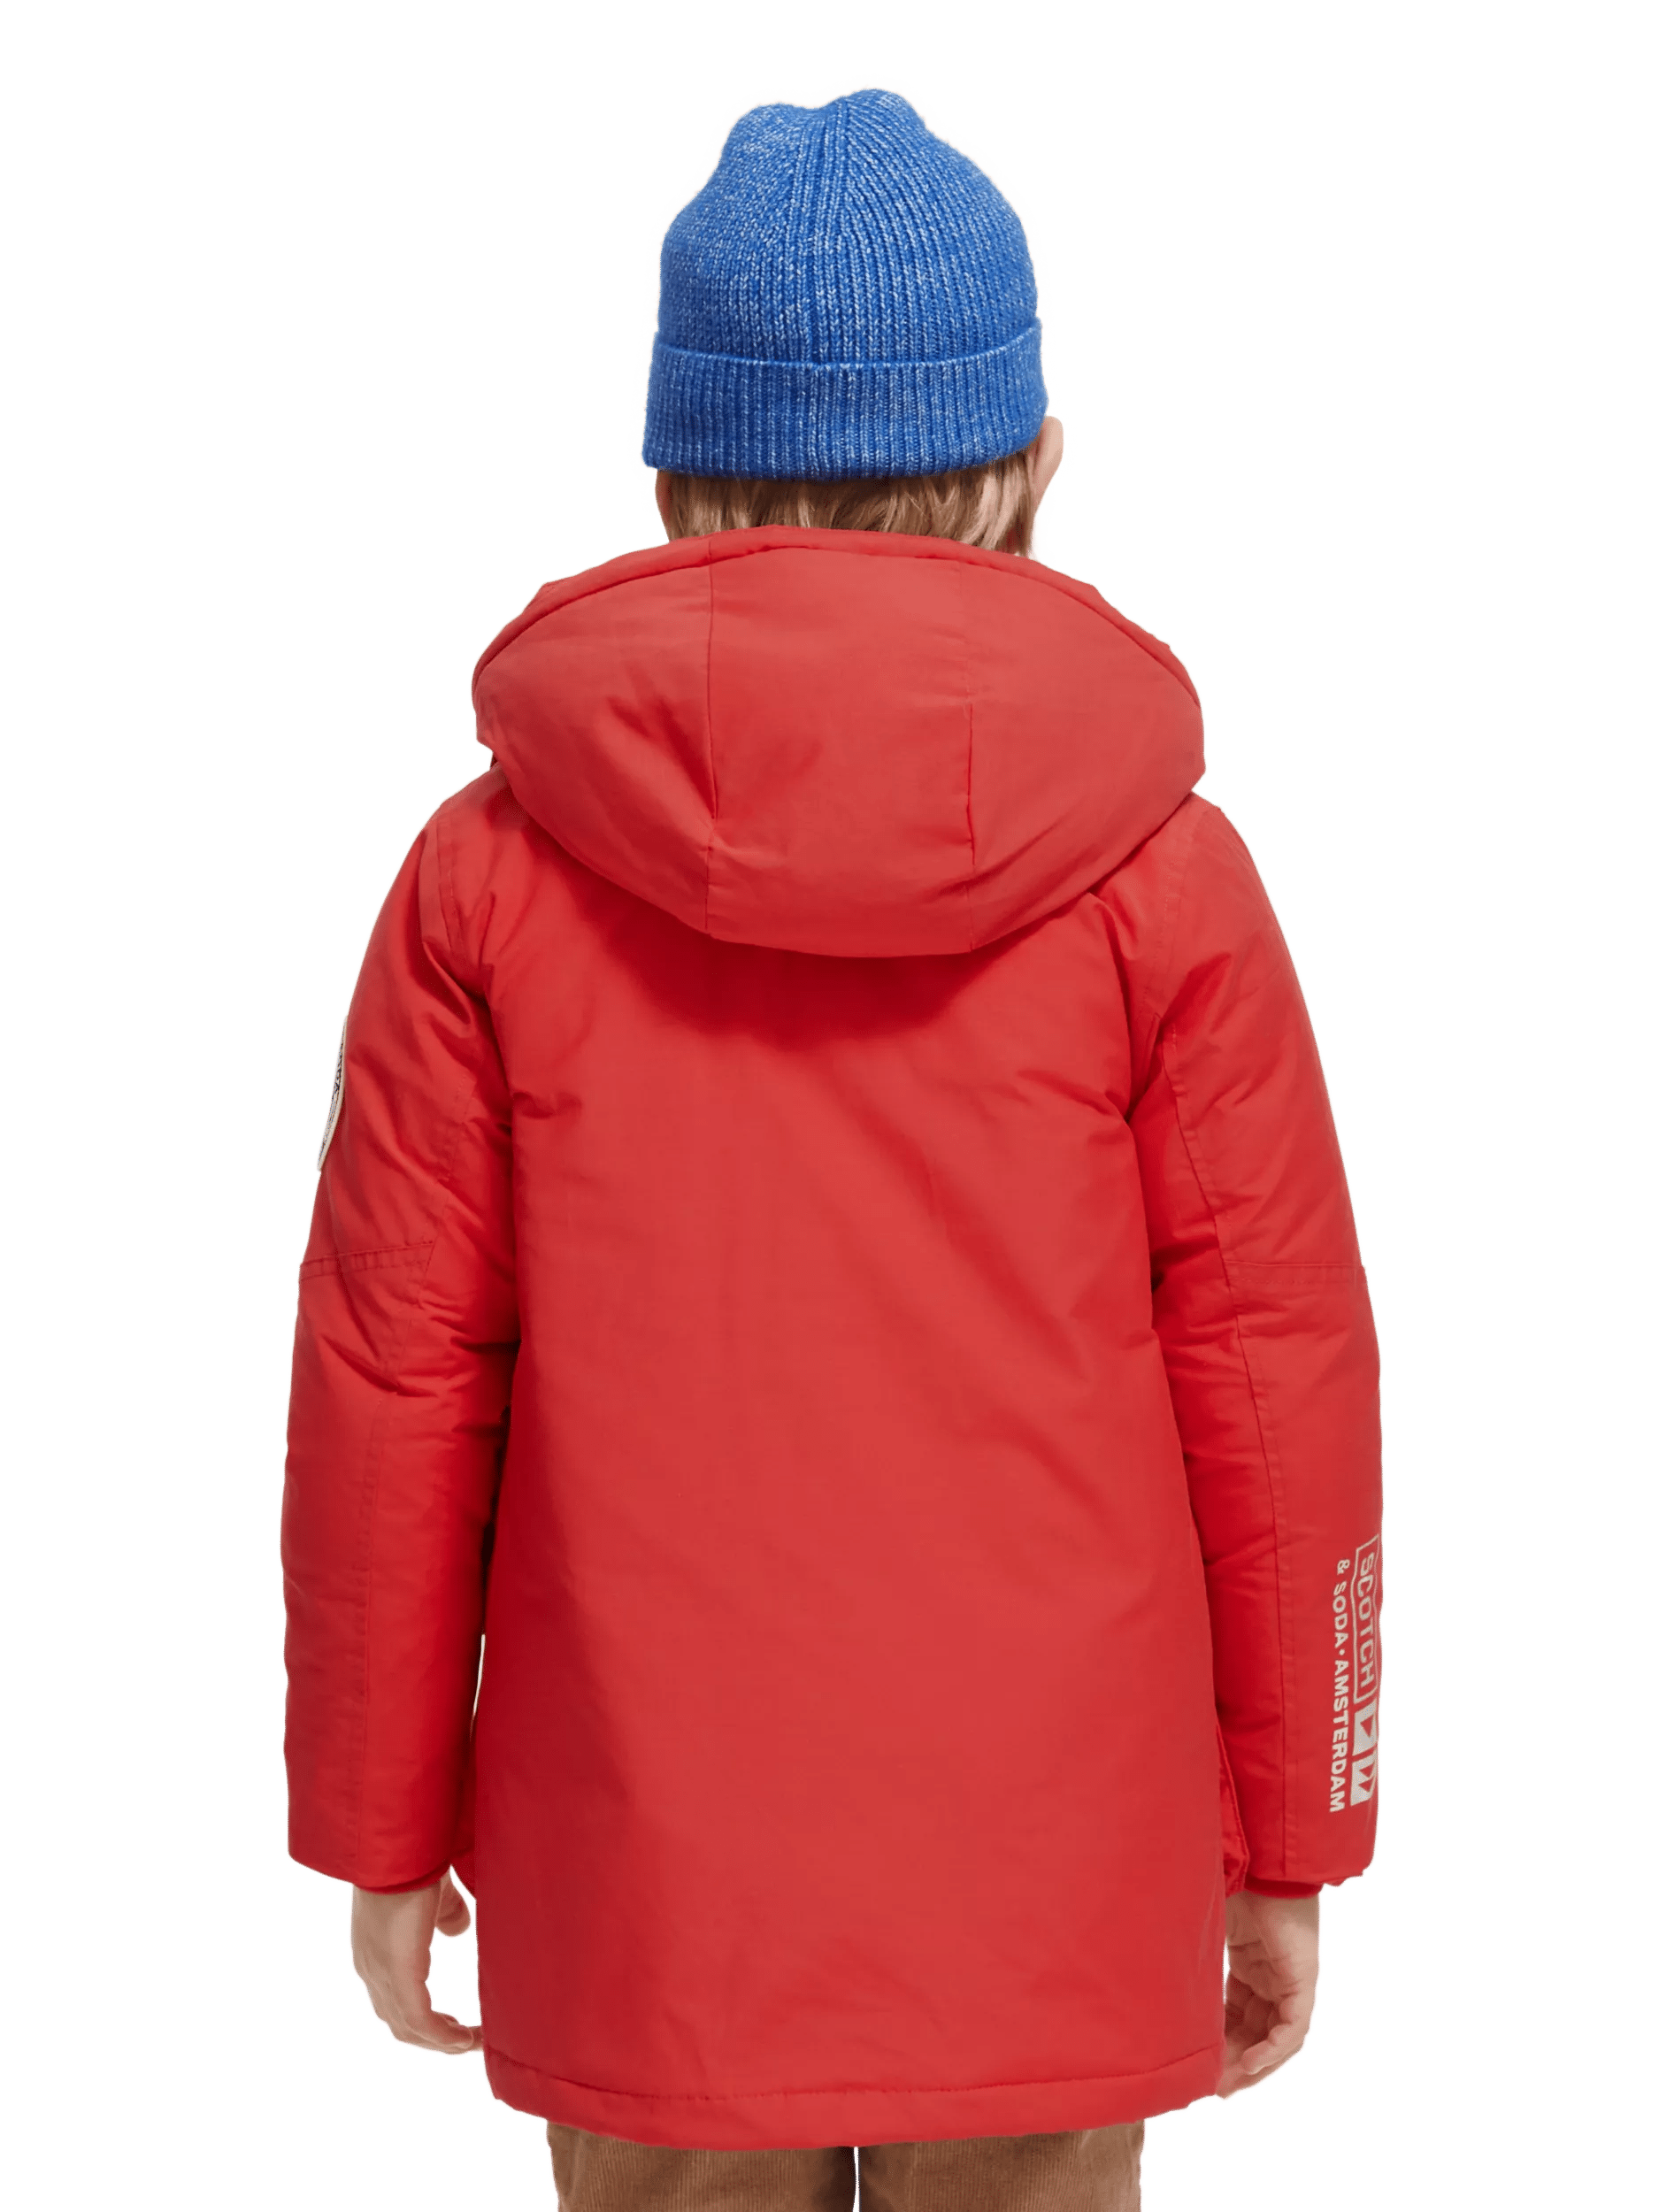 Scotch & Soda Longer length water repellent jacket with Repreve -  filling MDL-BCK